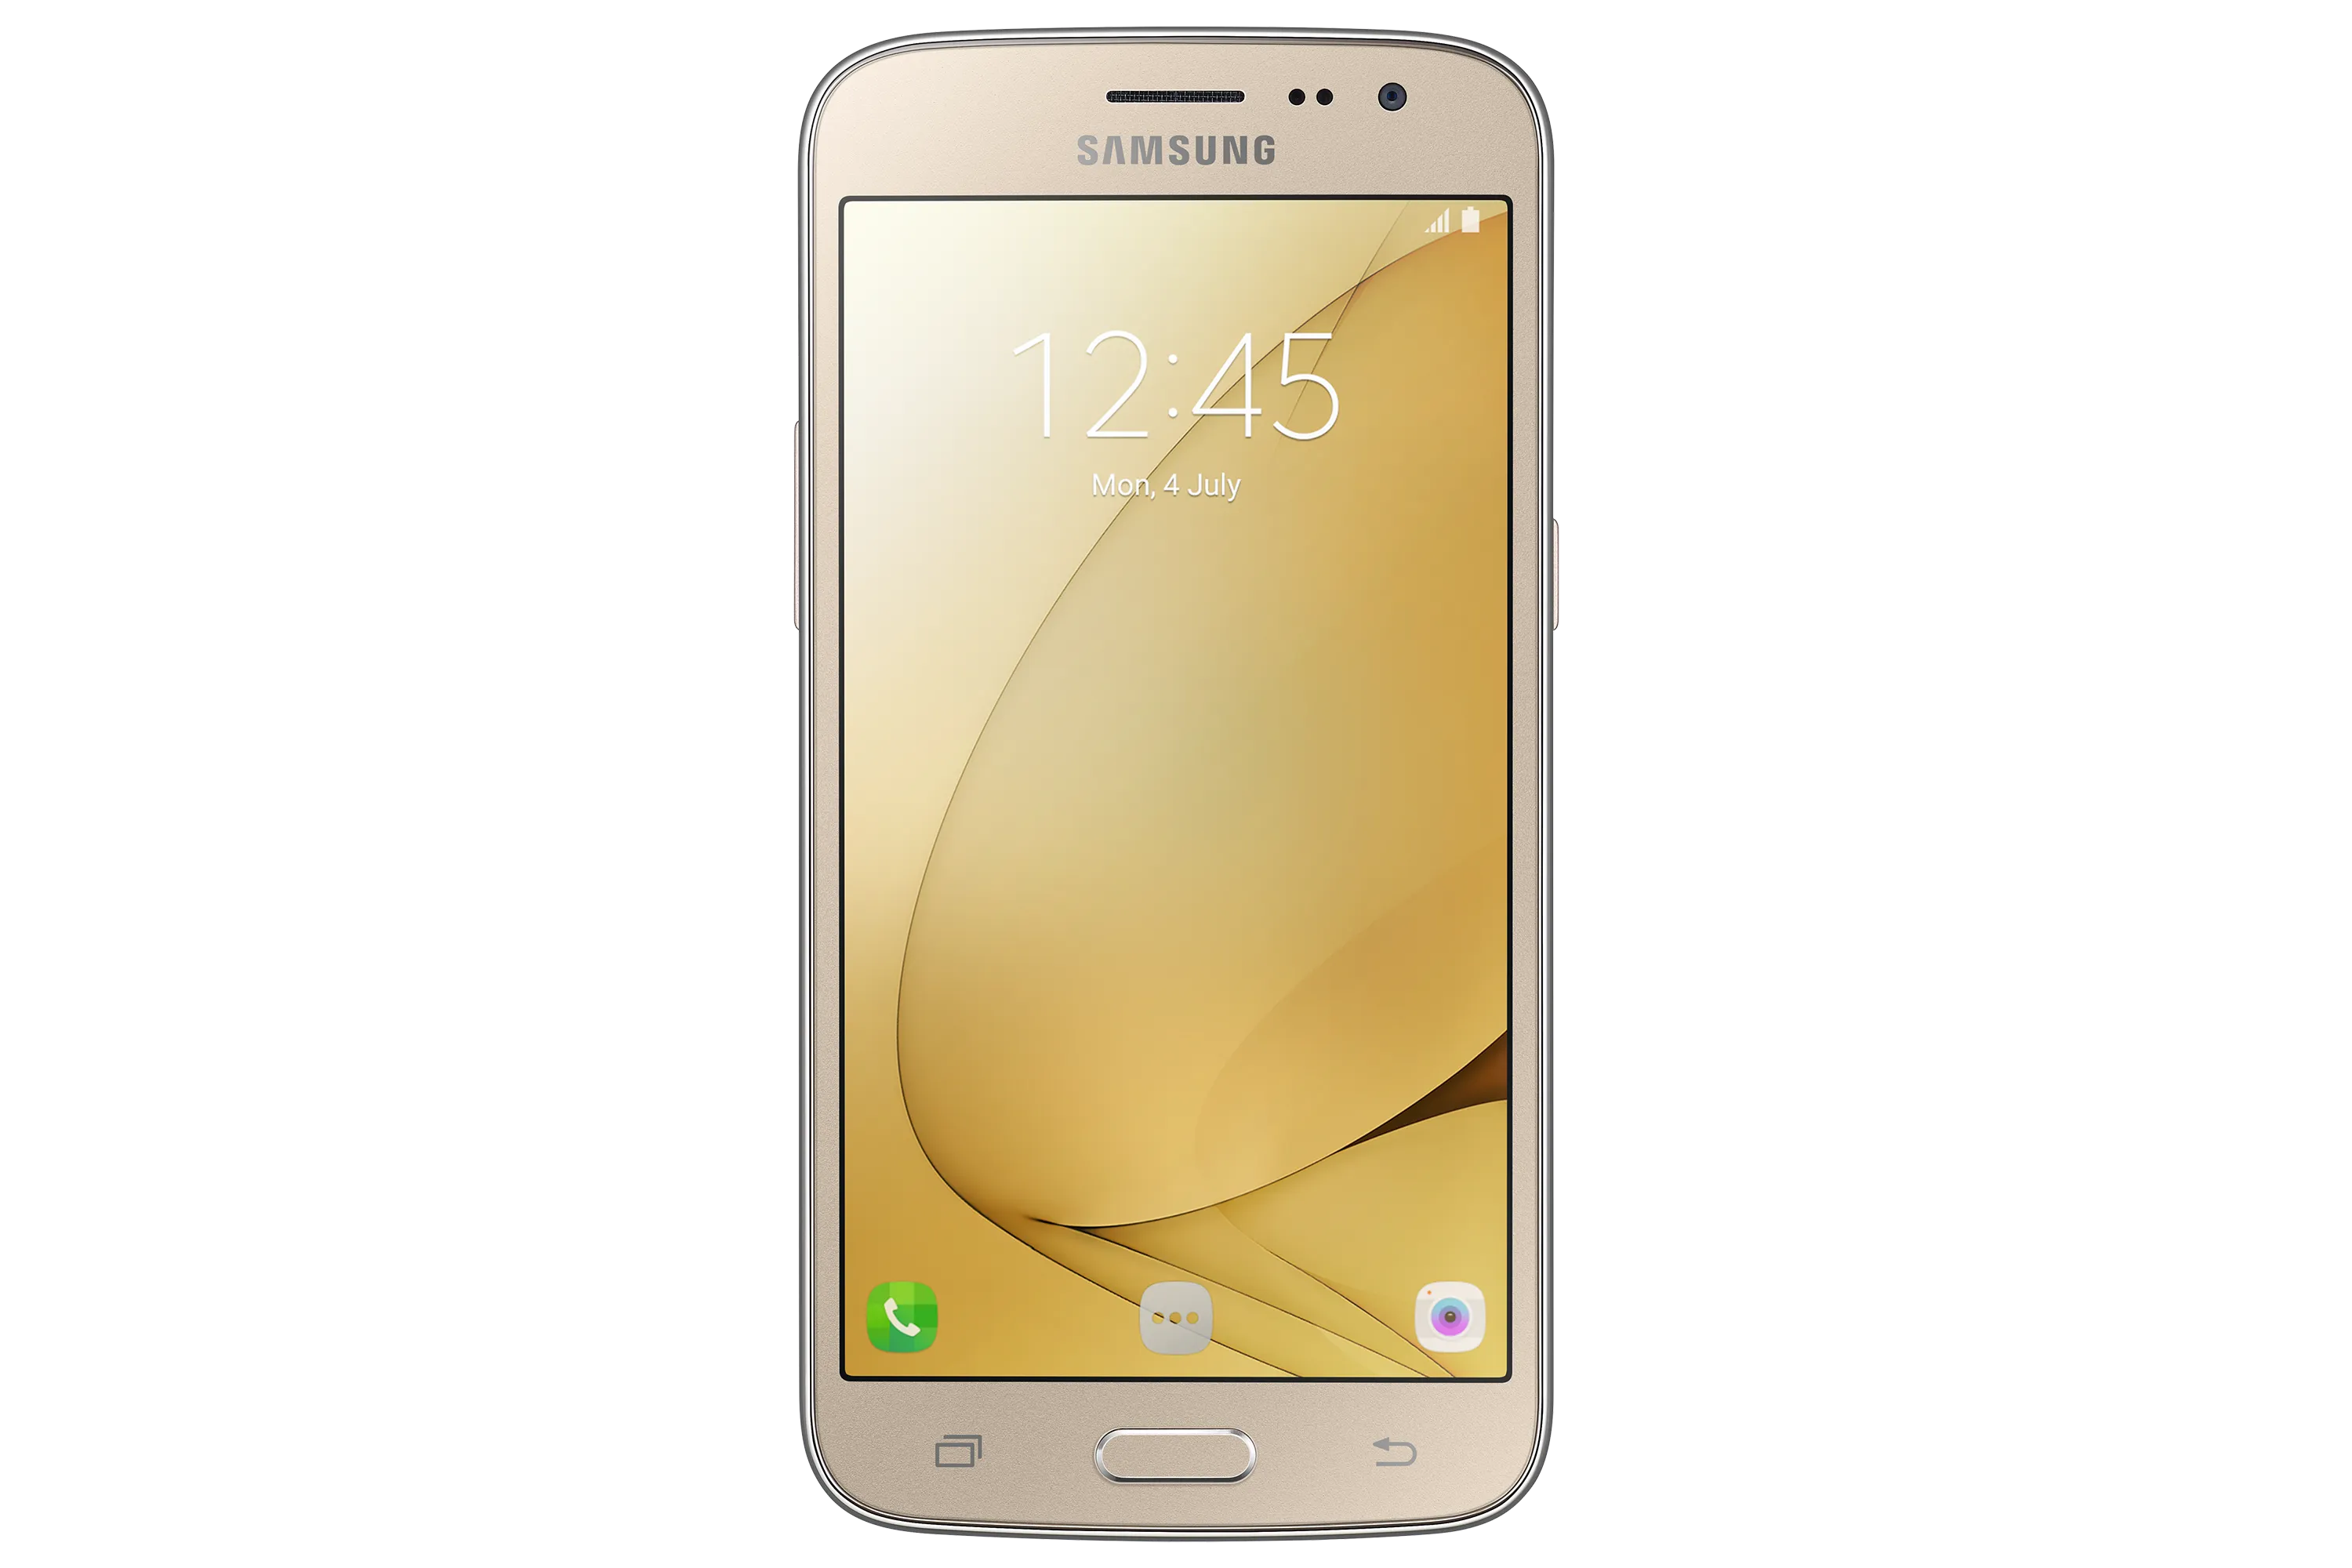 [Troubleshooting Guide] What to do if your Samsung Galaxy J2 (2016) continues rebooting on its own after the rooting method